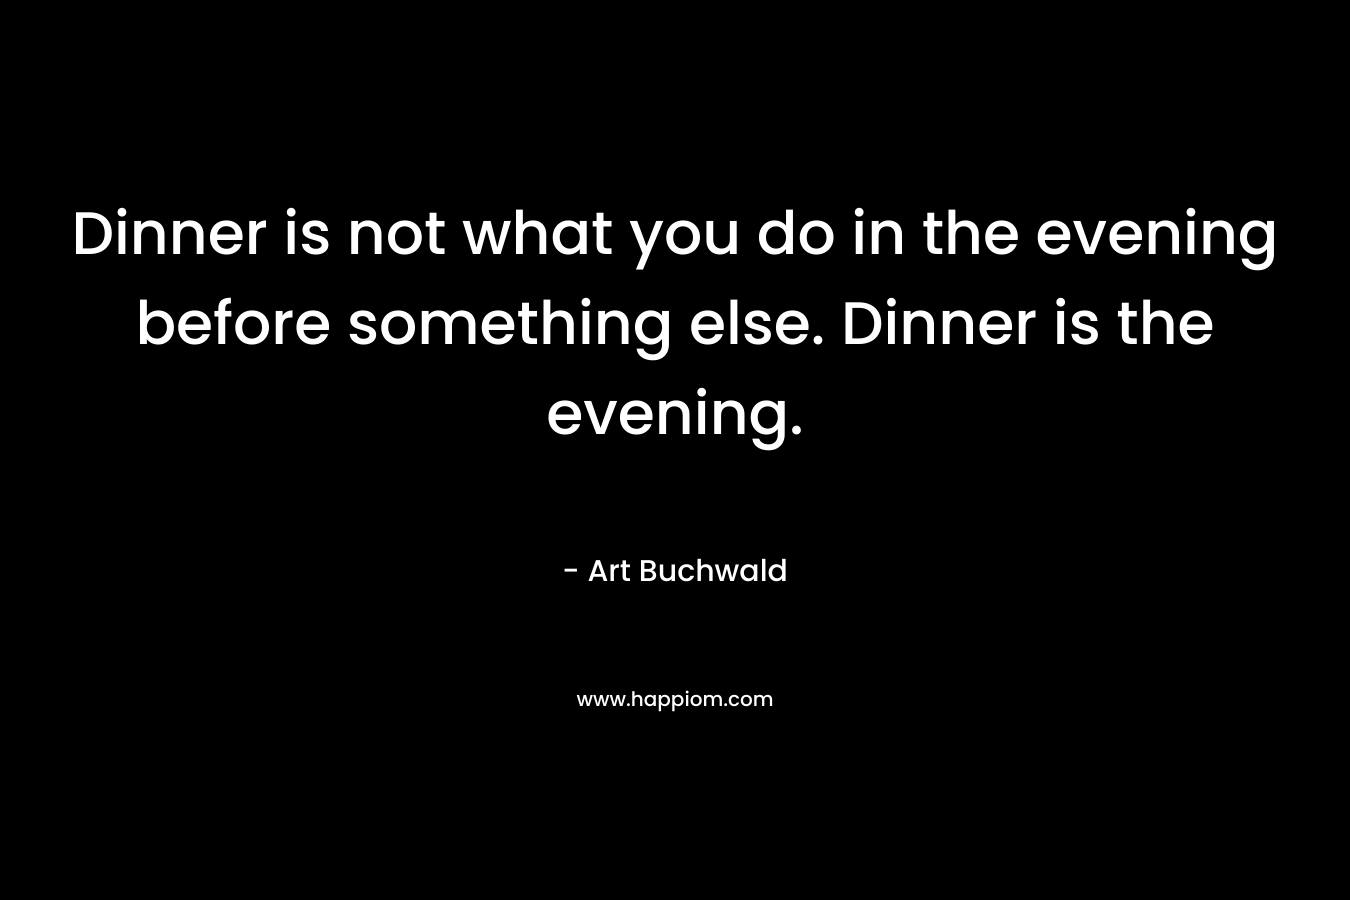 Dinner is not what you do in the evening before something else. Dinner is the evening.